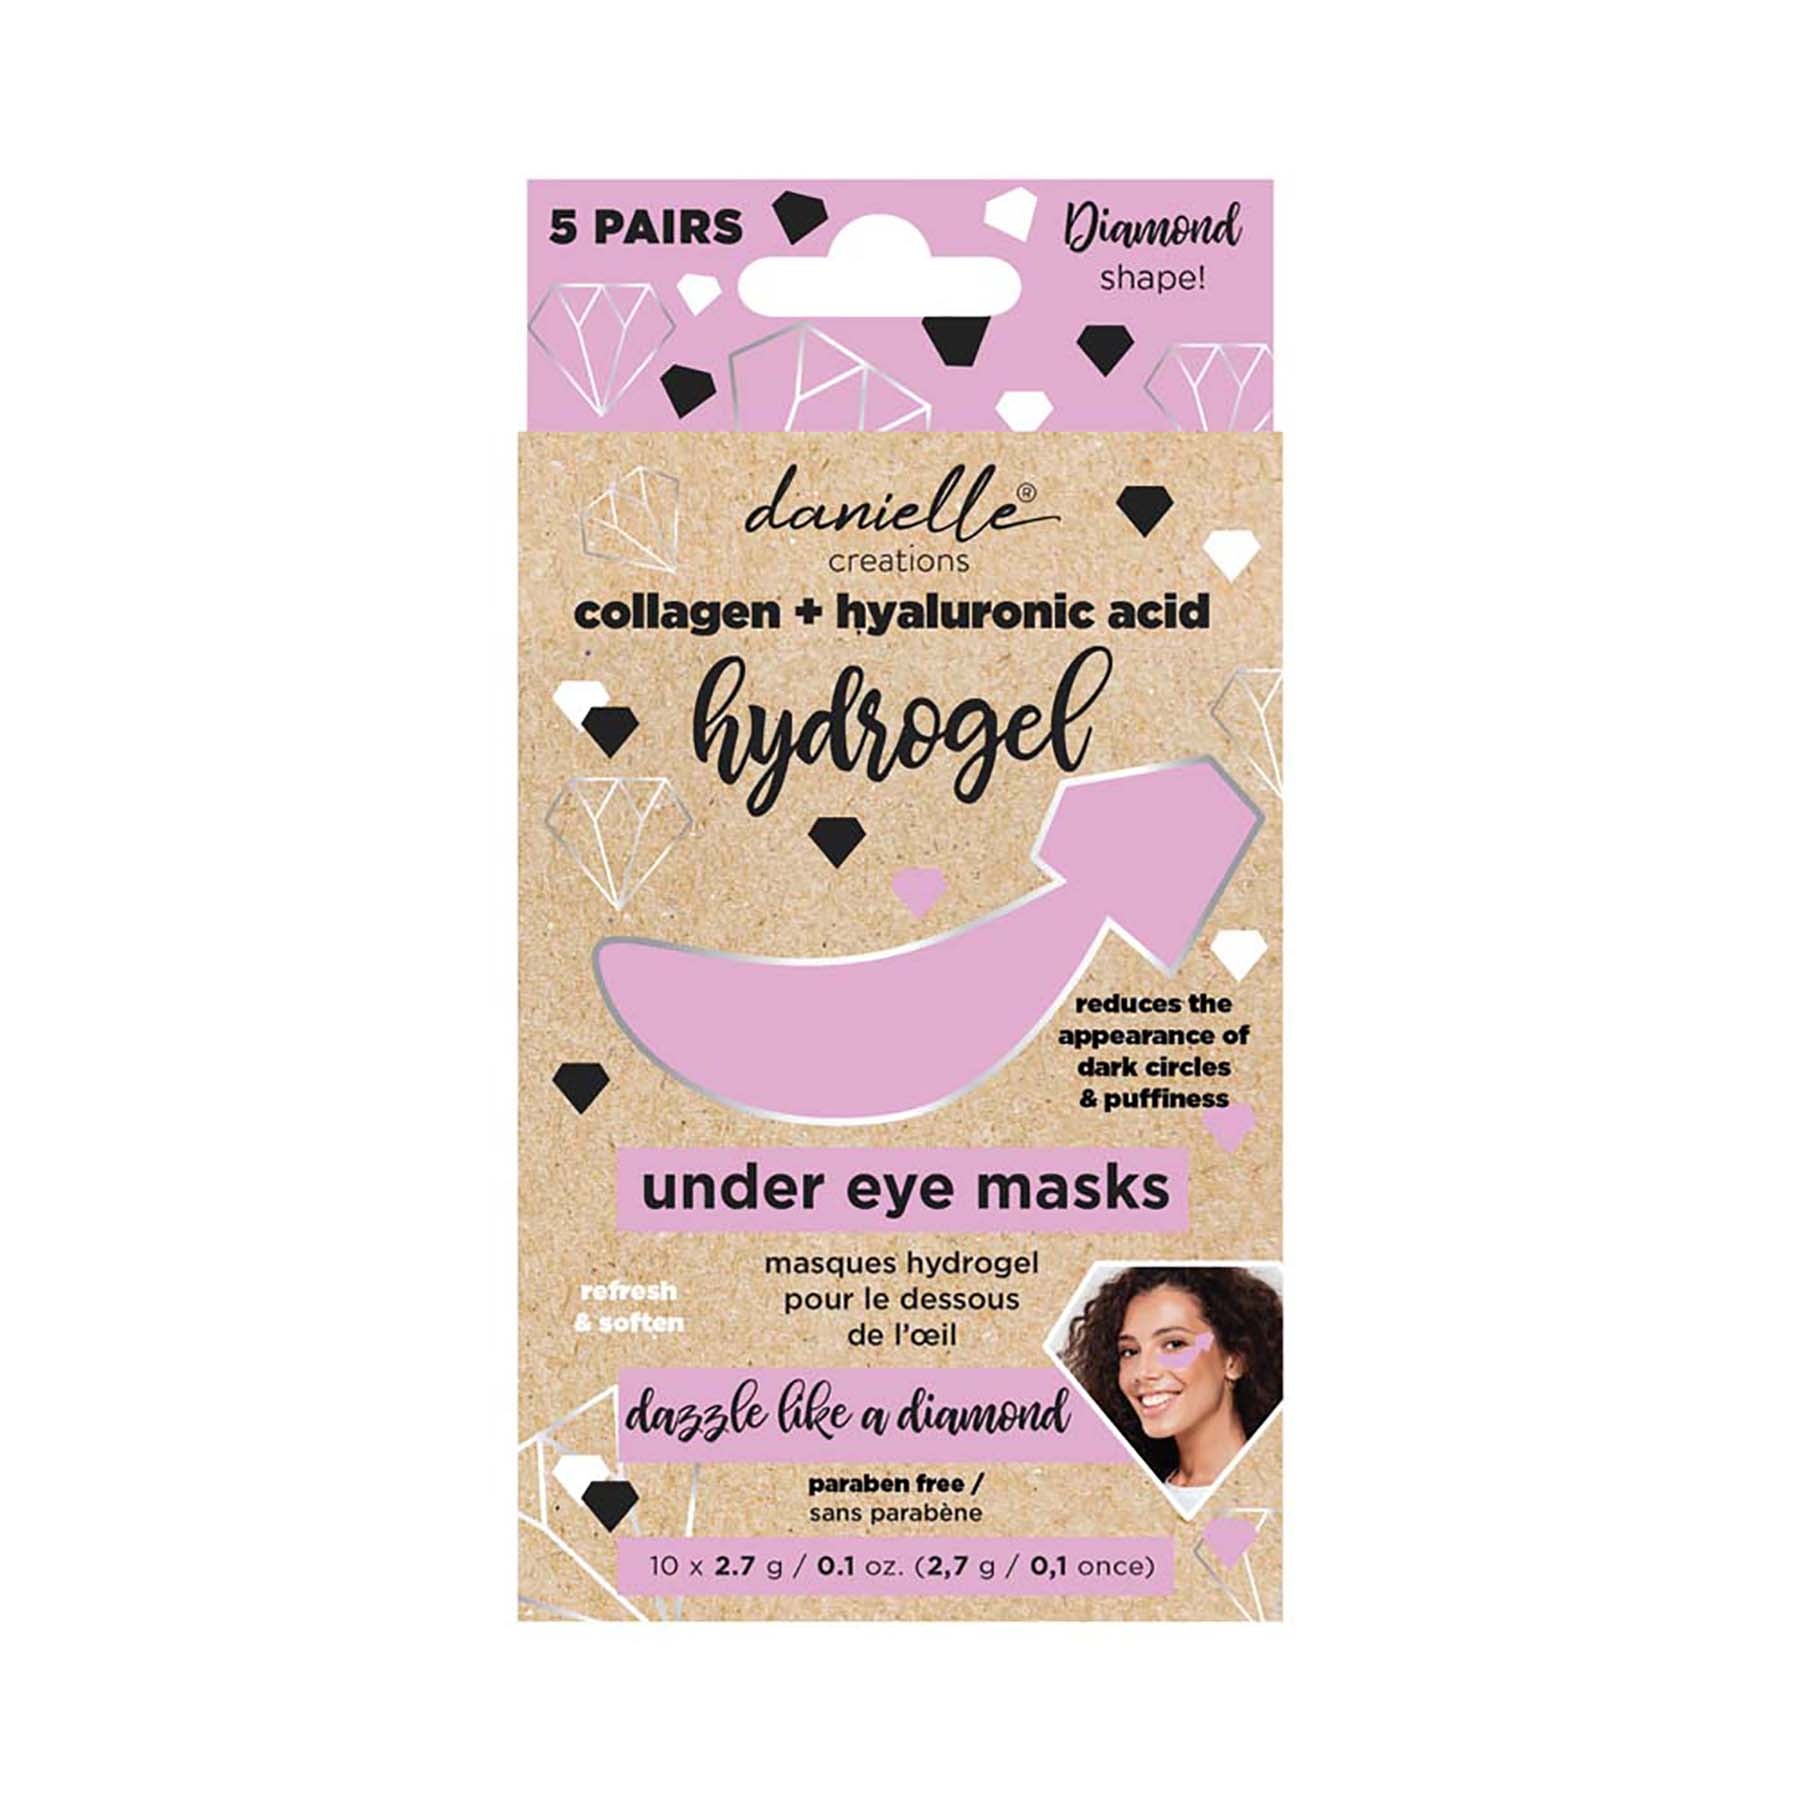 Danielle Creations 5 Pairs Under Eye Masks Collagen and Hyaluronic Acid 